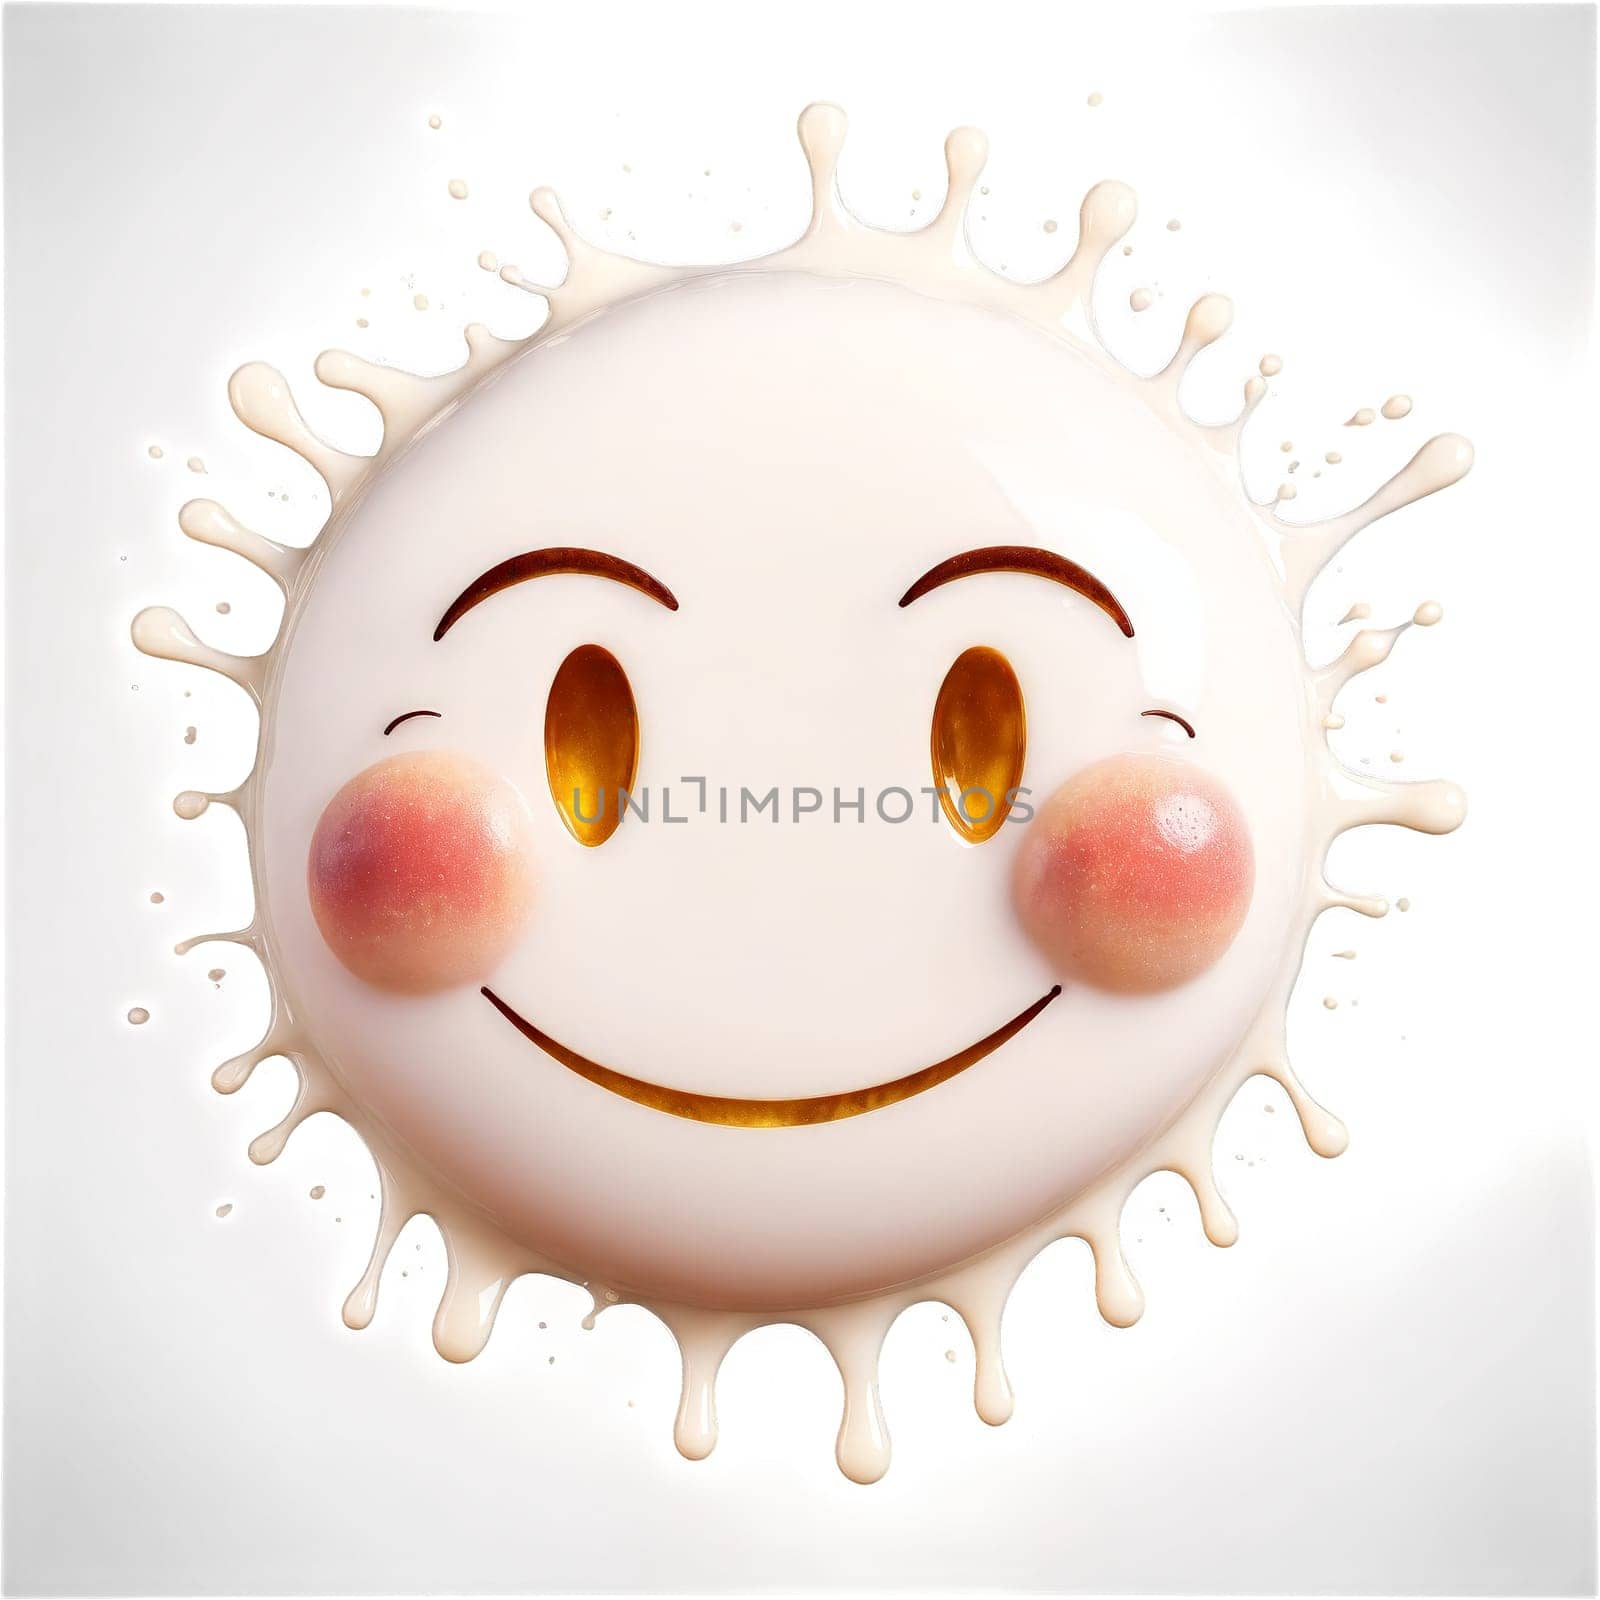 Smiling Face A smiling emoji face formed from milk splashes with droplets flying around by panophotograph